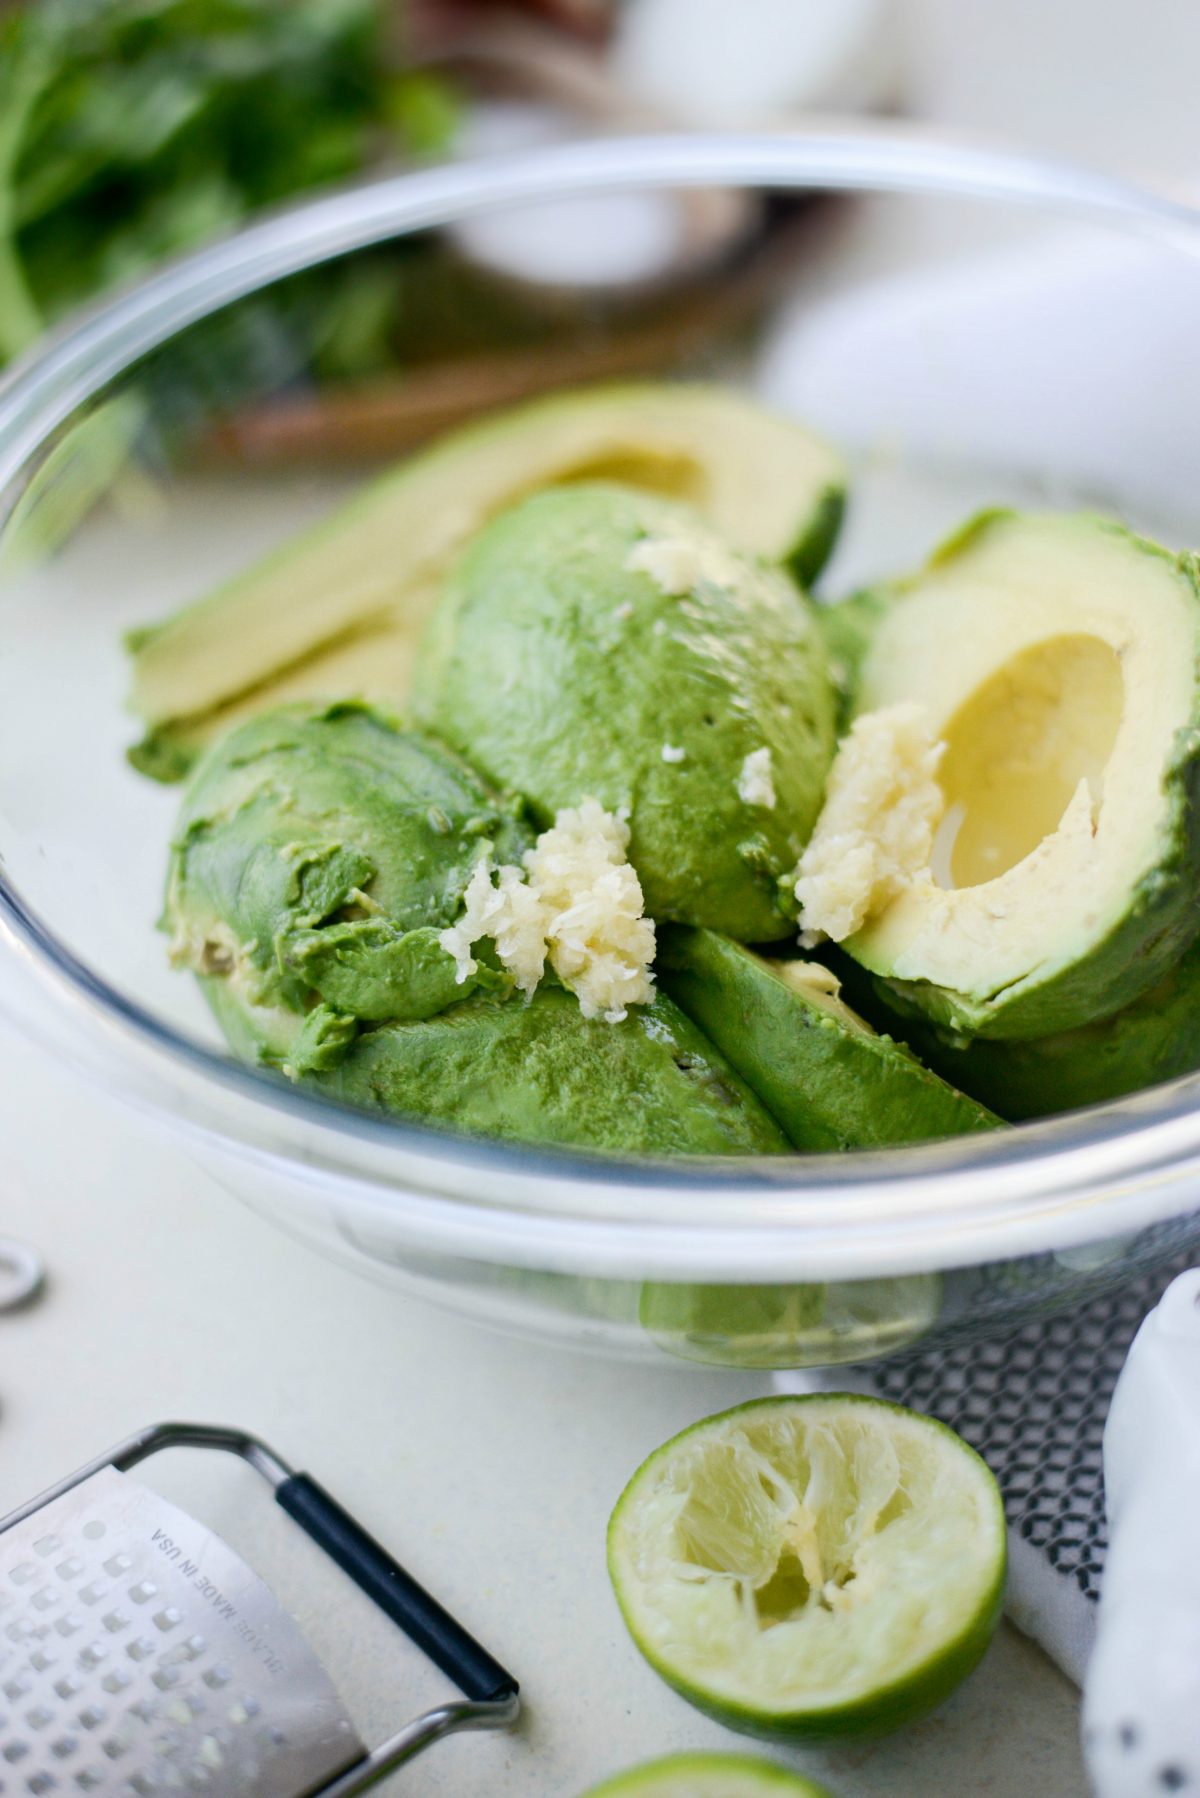 garlic with avocados in bowl